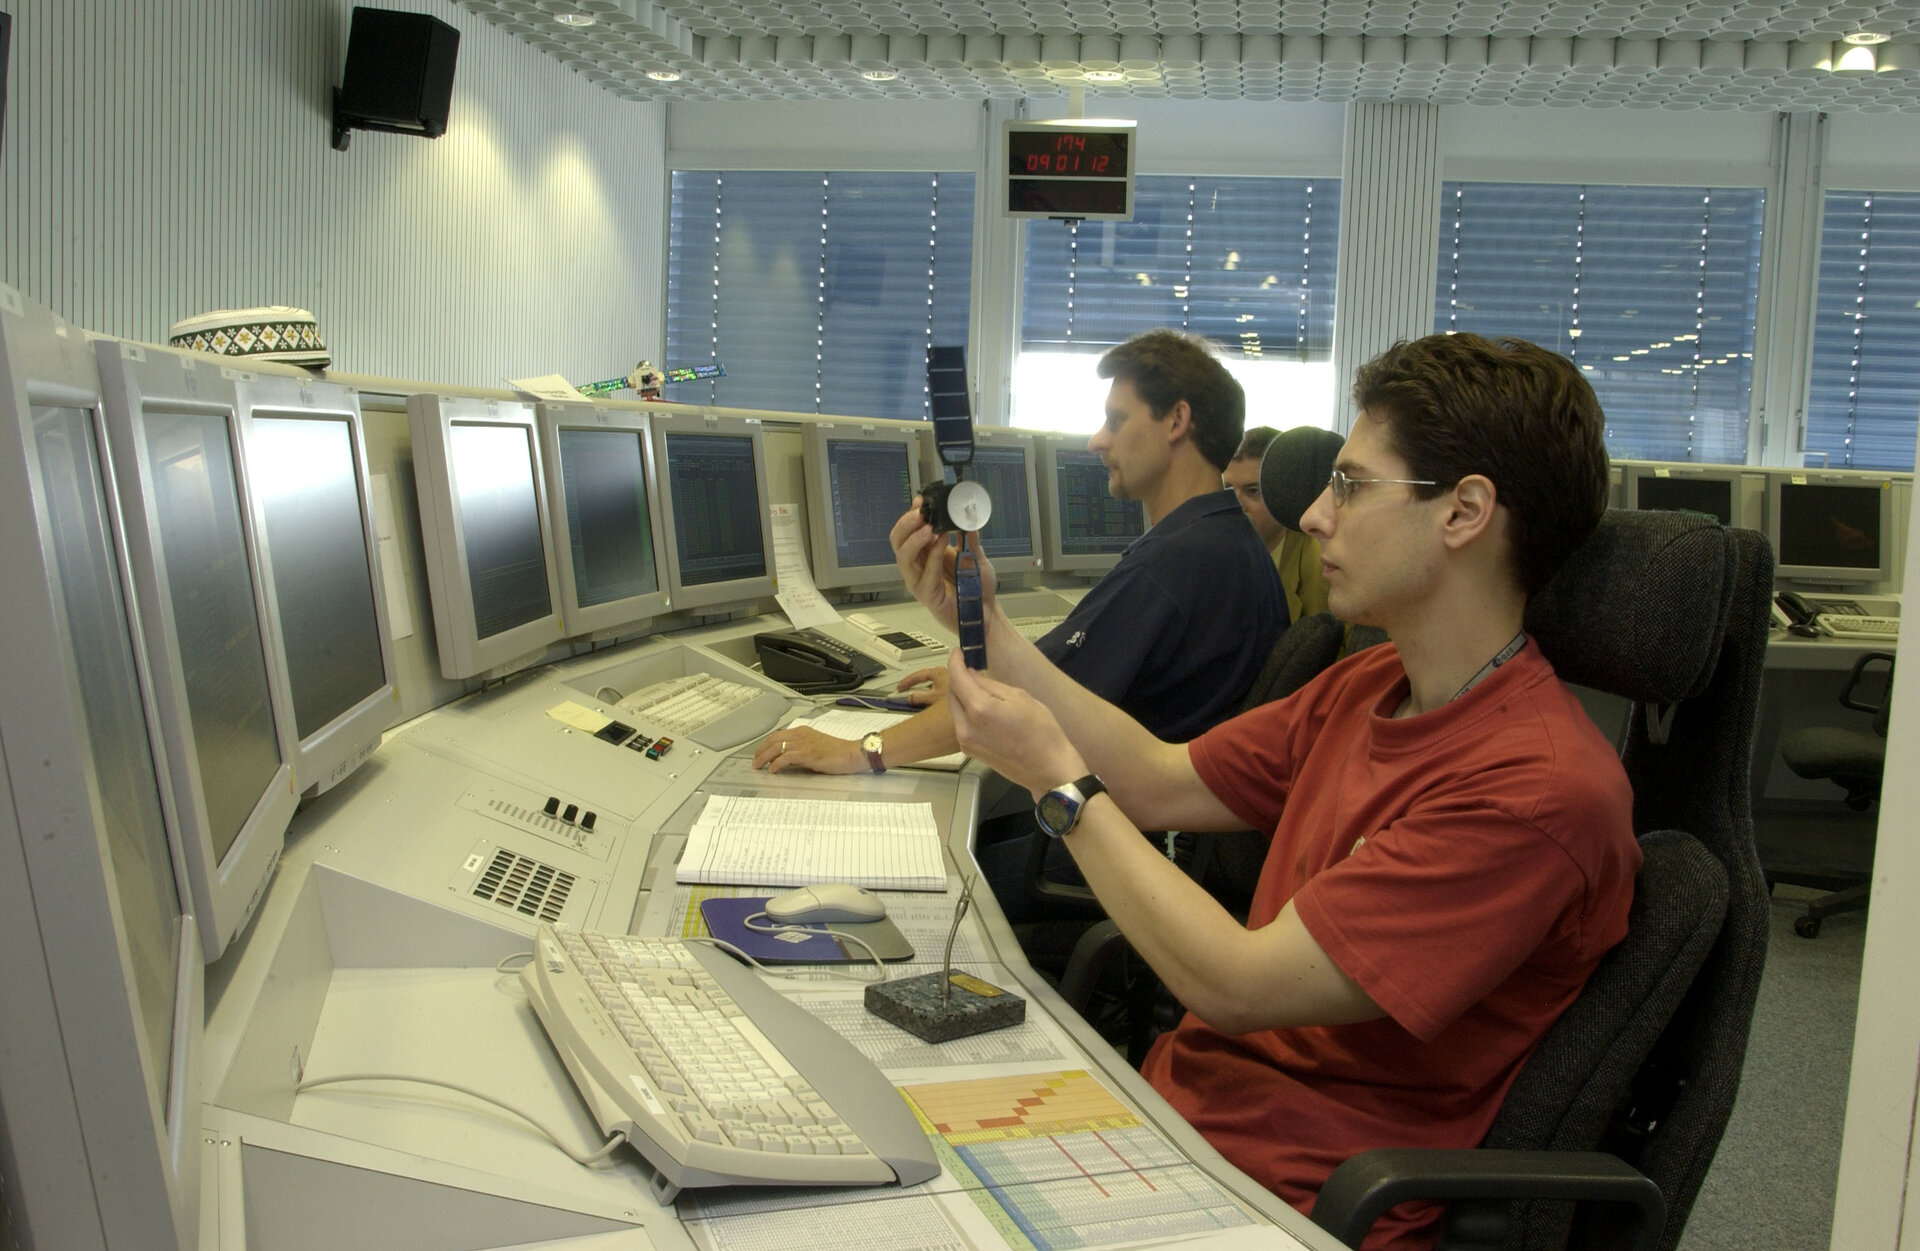 The Mars Express Control room at ESOC